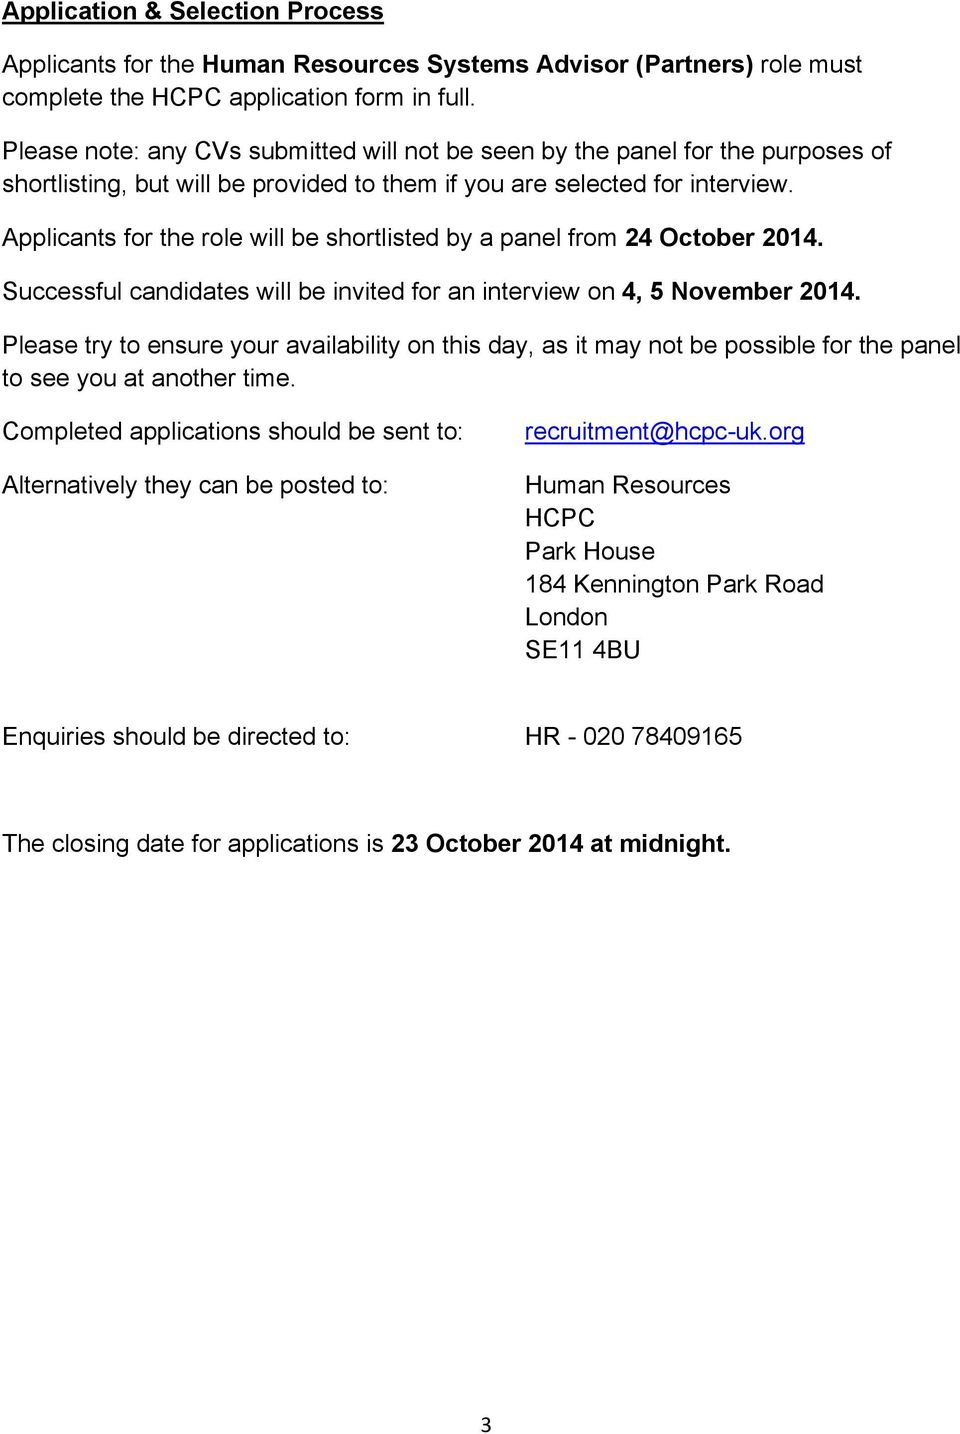 Applicants for the role will be shortlisted by a panel from 24 October 2014. Successful candidates will be invited for an interview on 4, 5 November 2014.